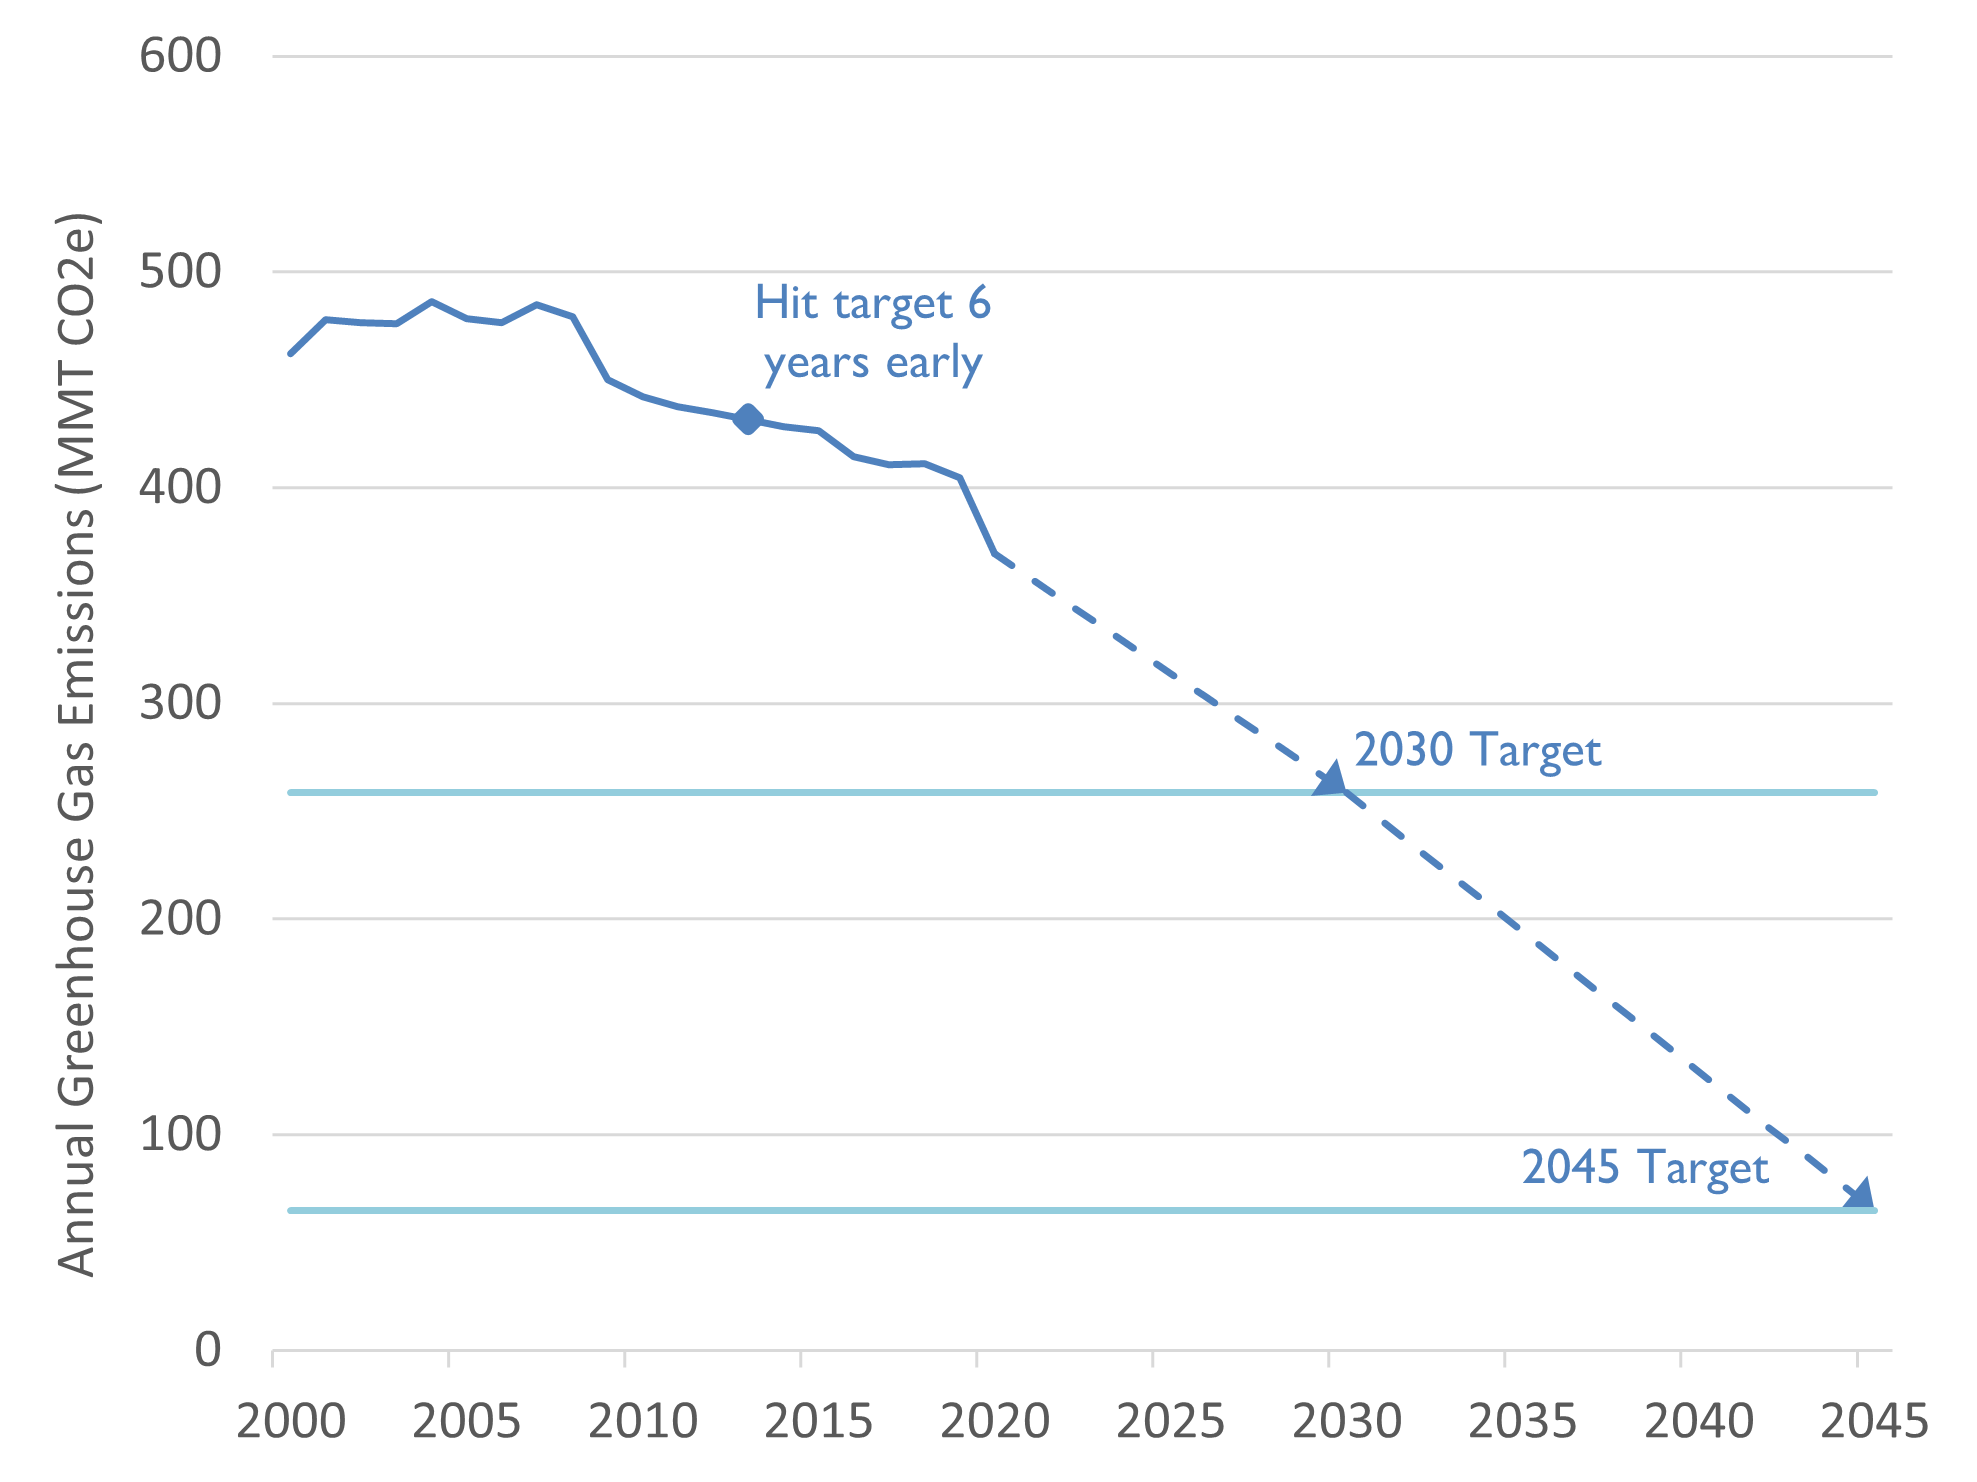 Graph of California's annual GHG emissions since 2000. Emissions peaked at 491 MMT CO2e in 2004 and were 418 MMT CO2 in 2019. 